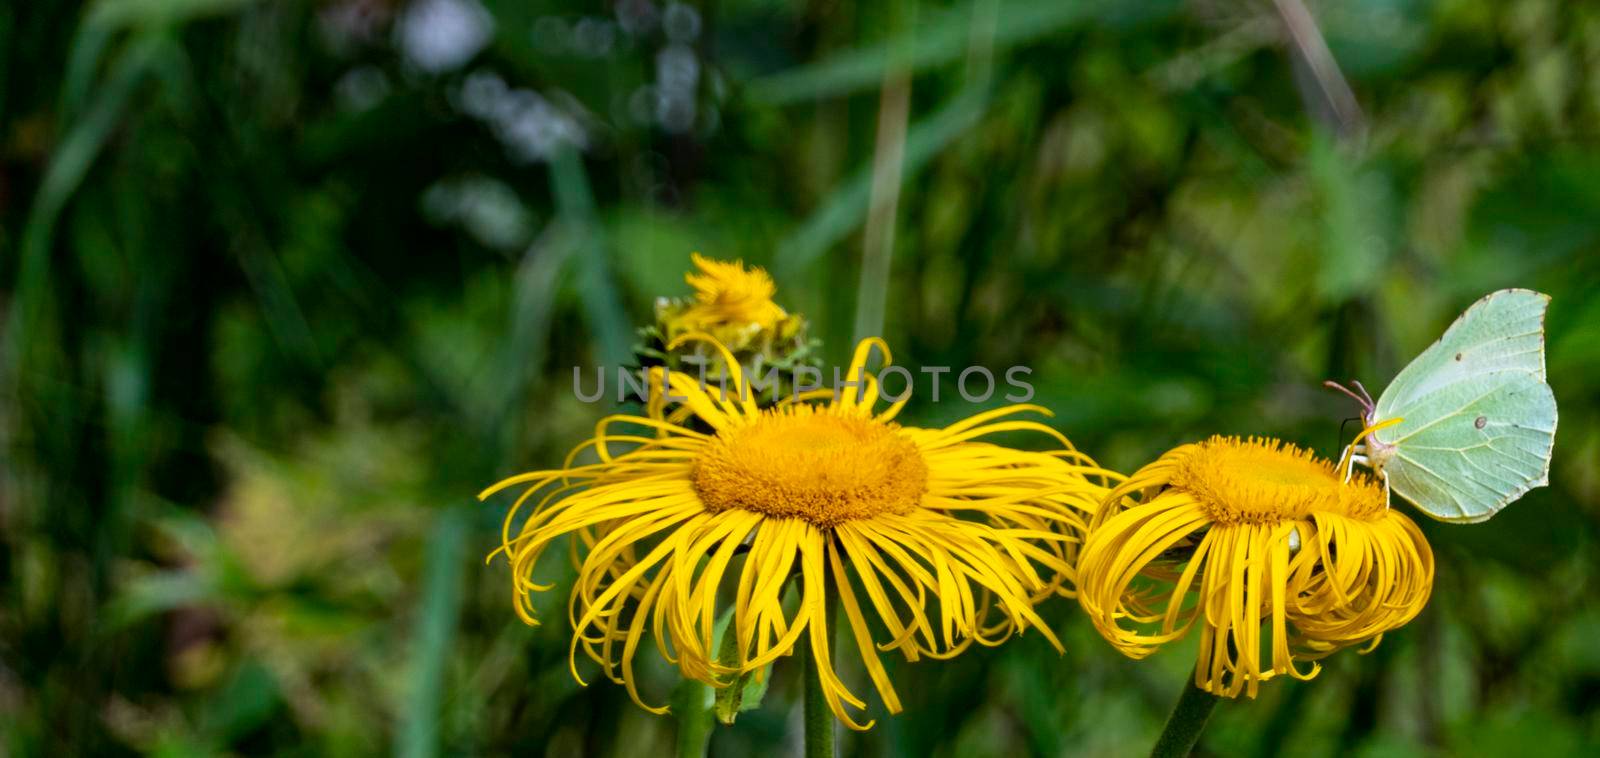 Yellow butterfly - gonepteryx rhamni - collects nectar from a large yellow elecampane flower by kajasja